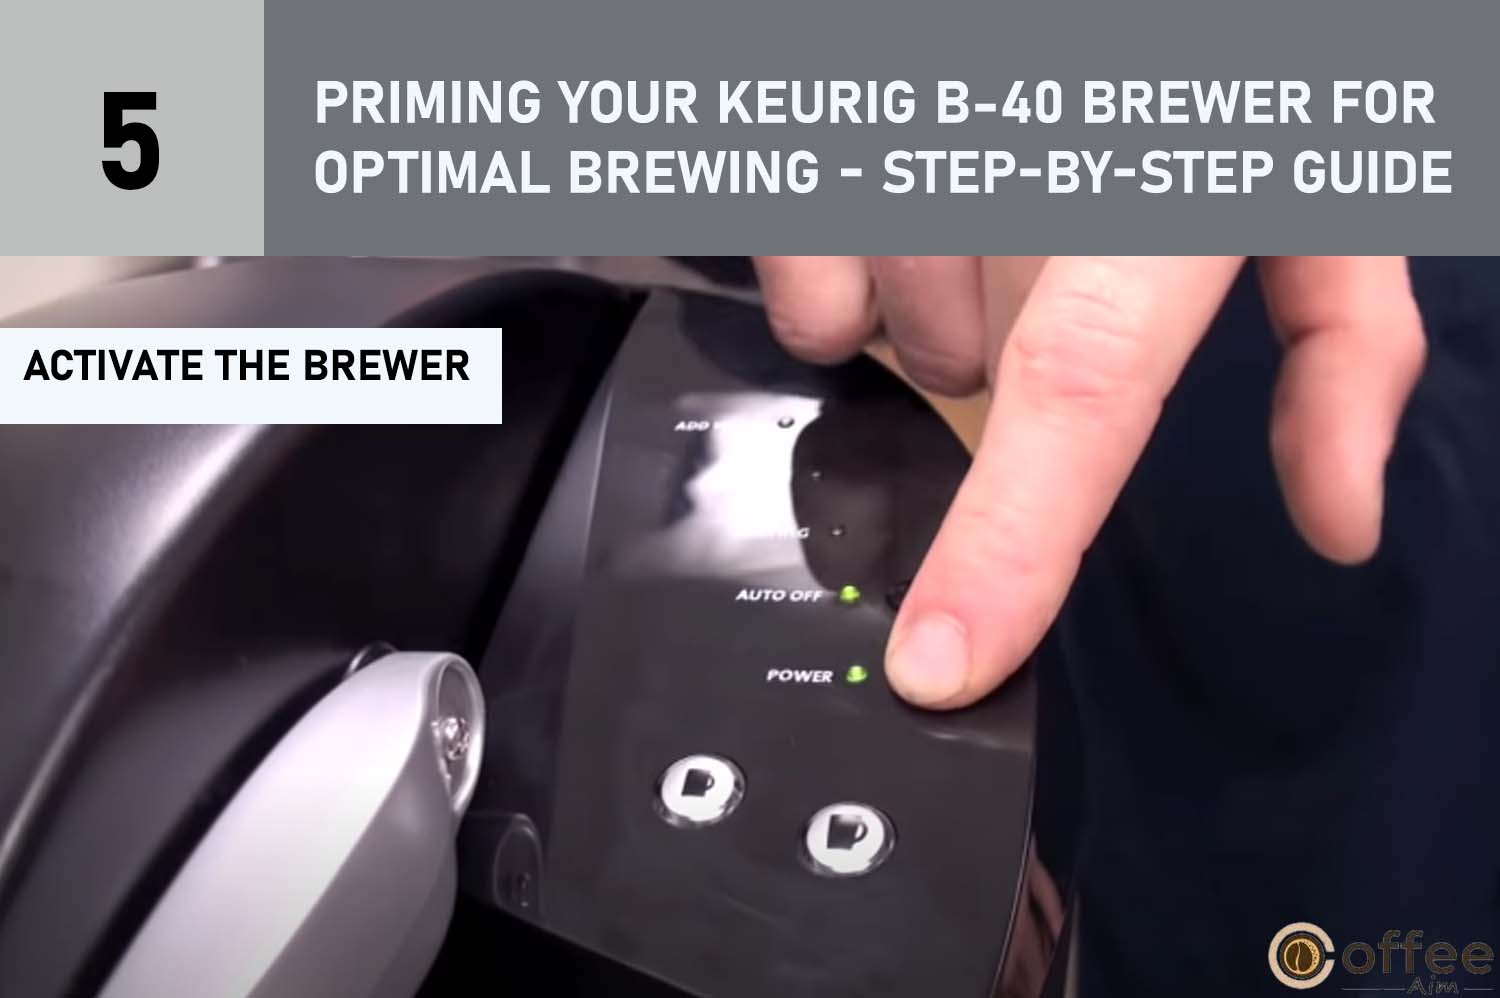 This image illustrates the process of "Activating the Brewer," a crucial step within the comprehensive guide titled "Priming Your Keurig B-40 Brewer for Optimal Brewing - A Step-by-Step Guide," featured in the article "Mastering the Usage of Keurig B-40